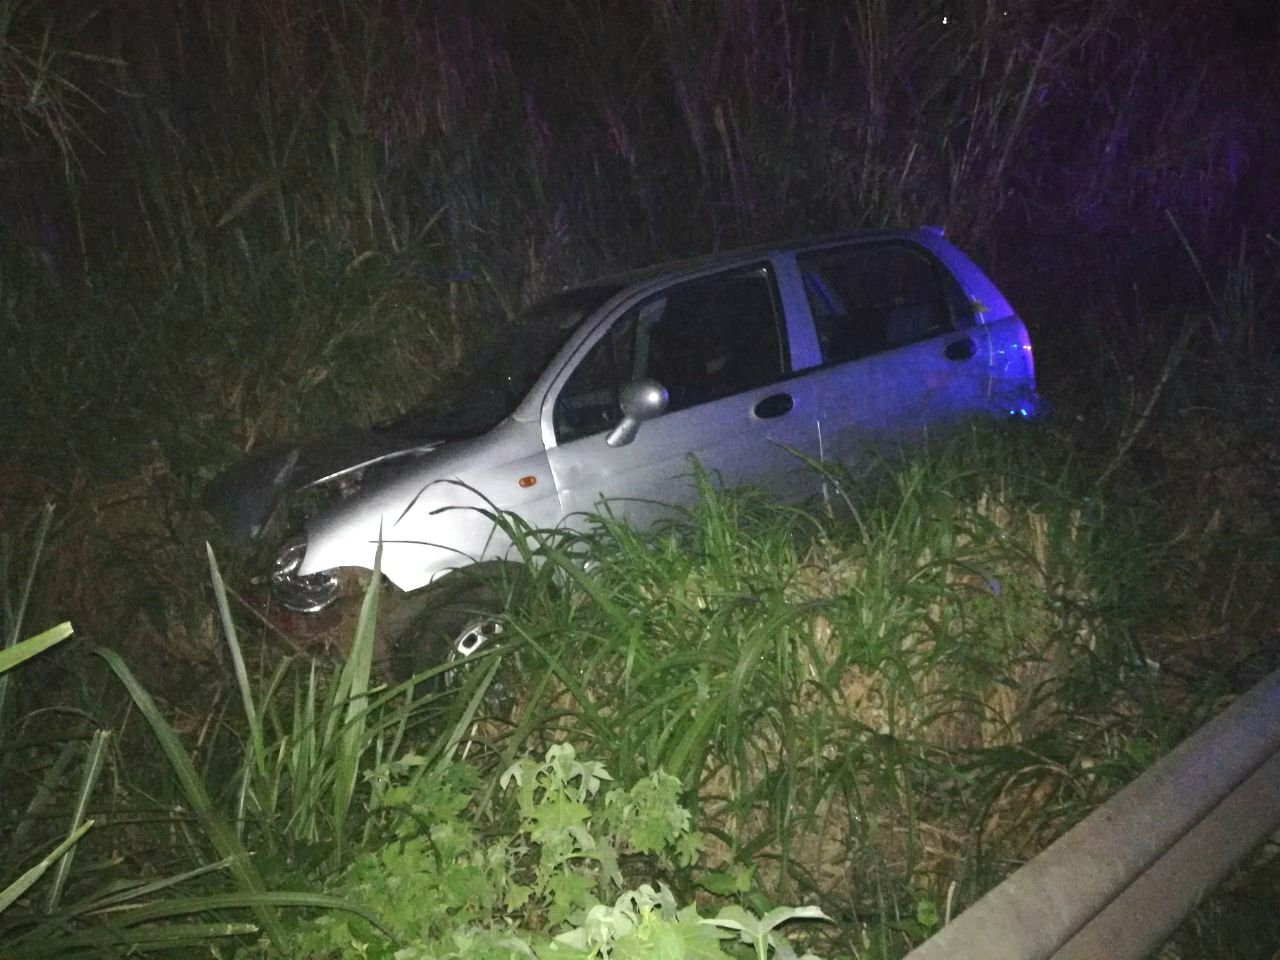 Passenger Injured In Crash caused by a suspected drunk driver in Verulam.